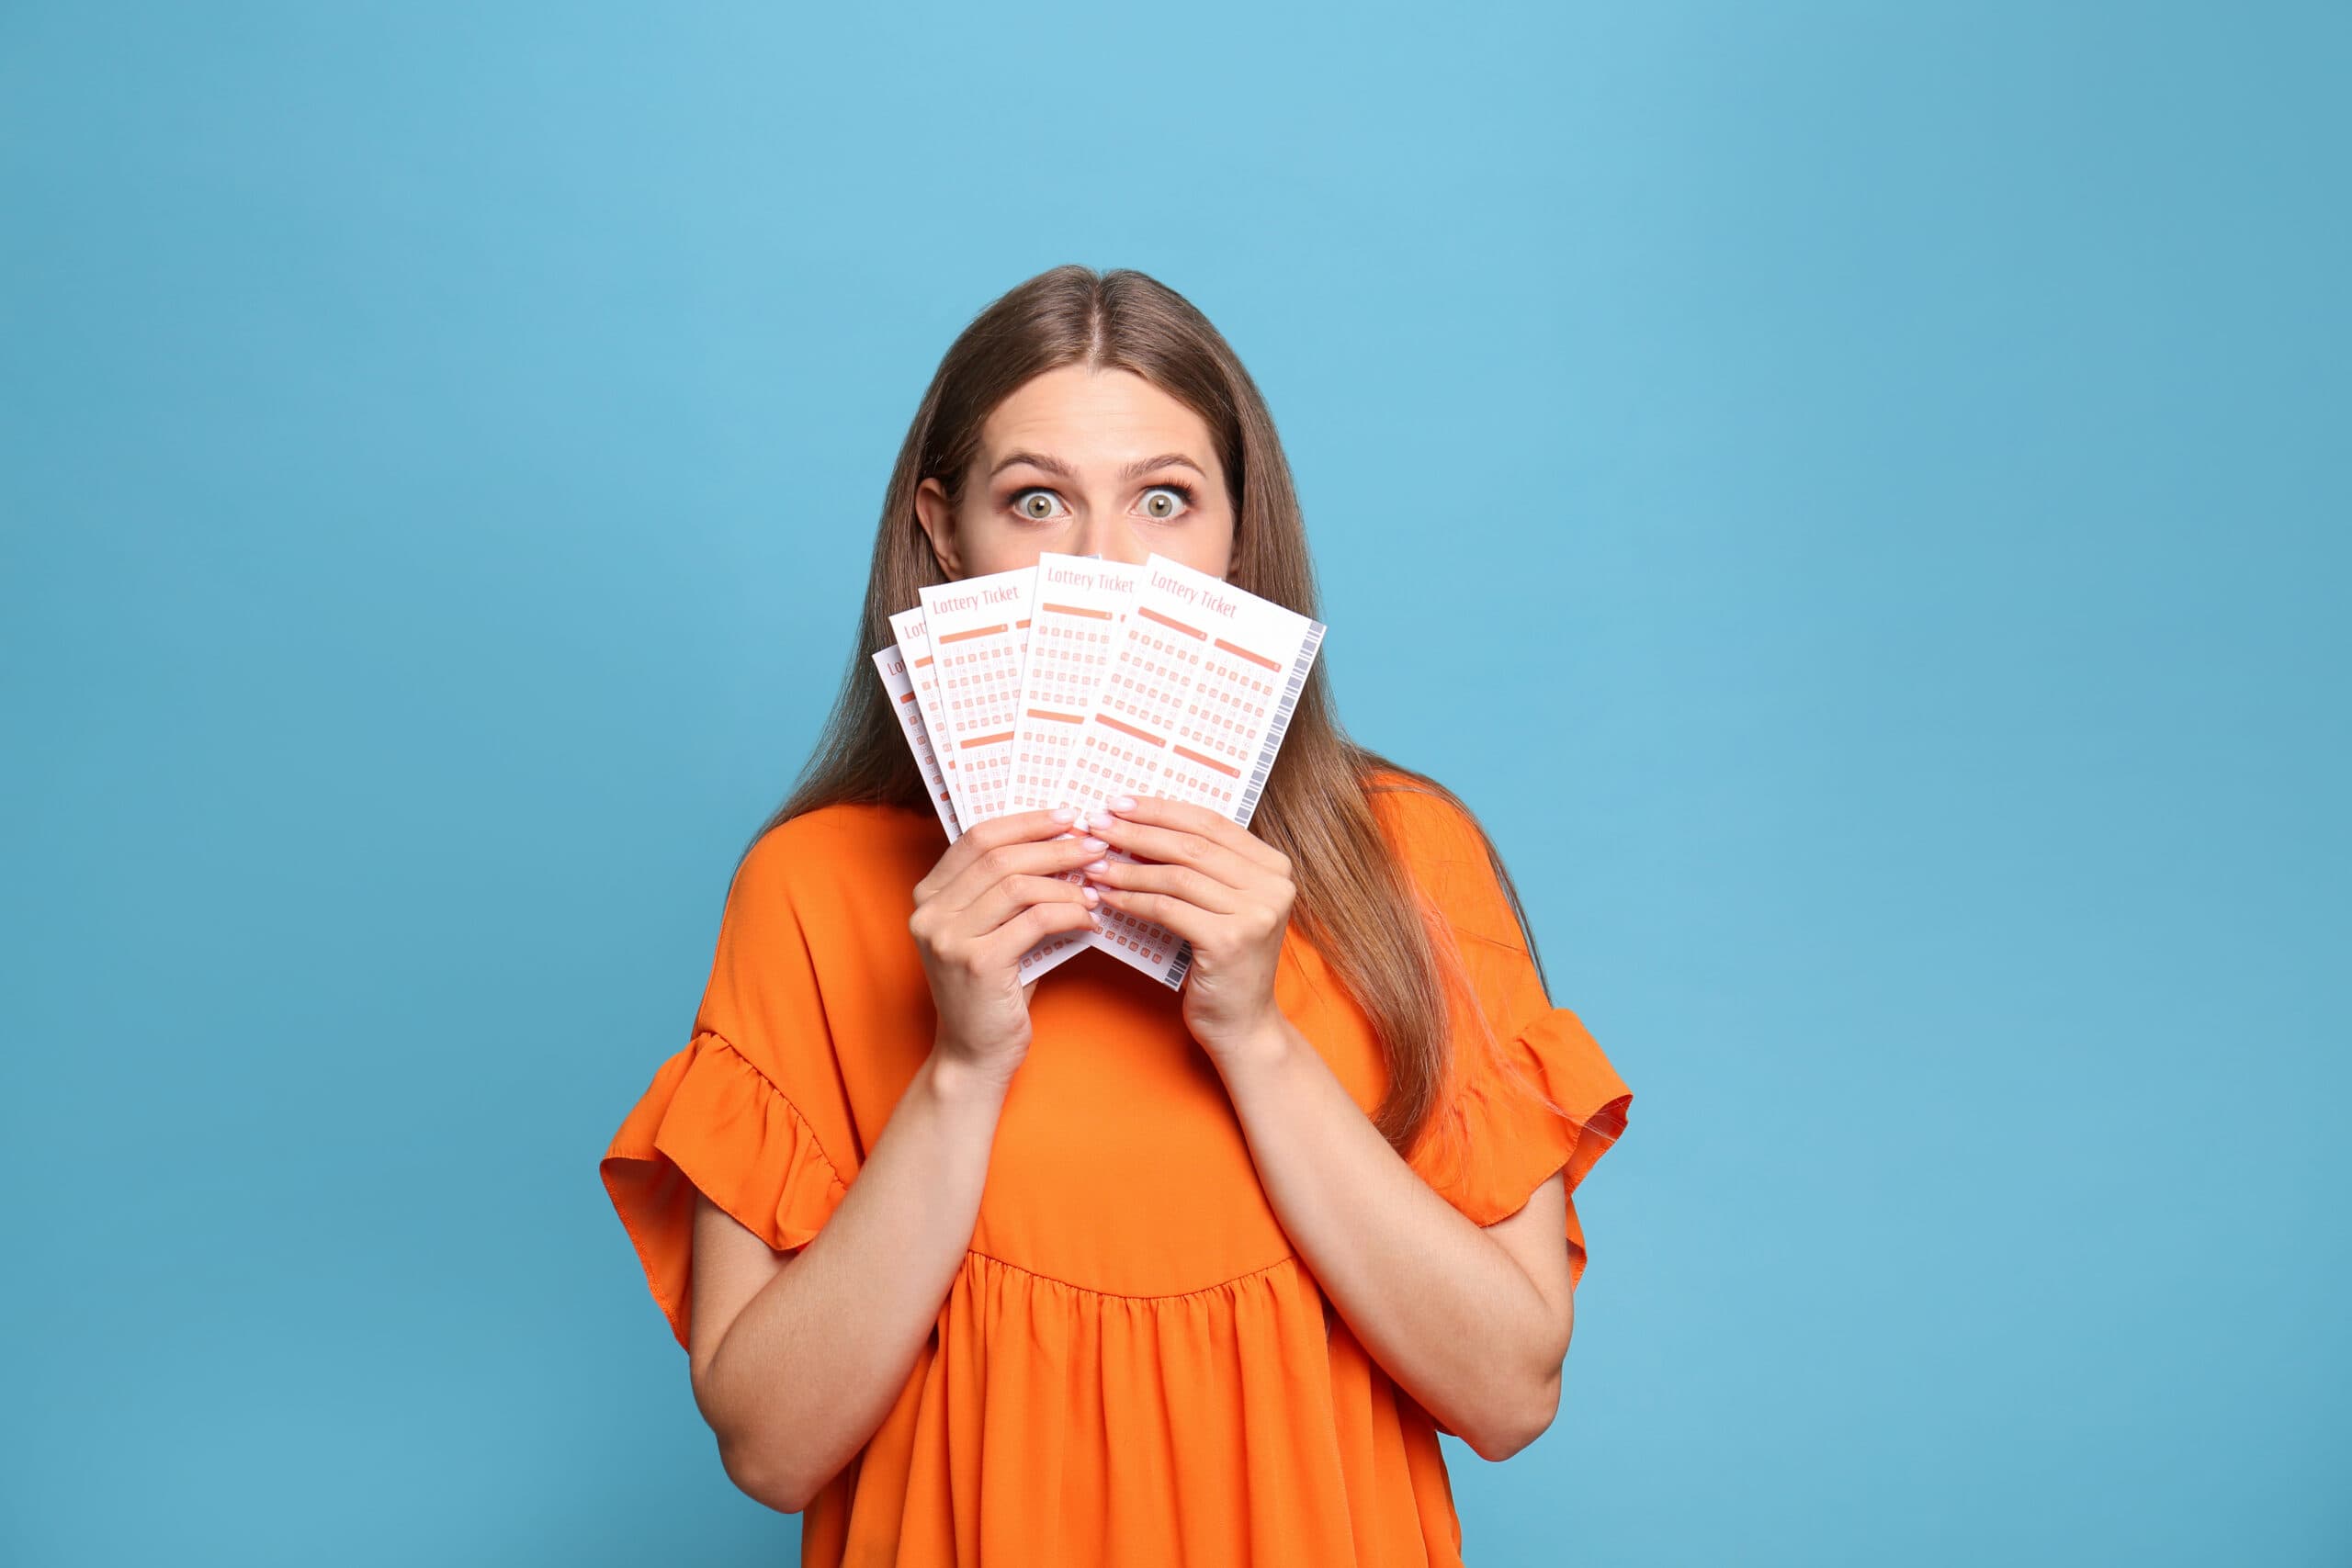 A young woman wearing a bright orange top holds lottery tickets and looks excitedly towards camera against a blue backdrop.